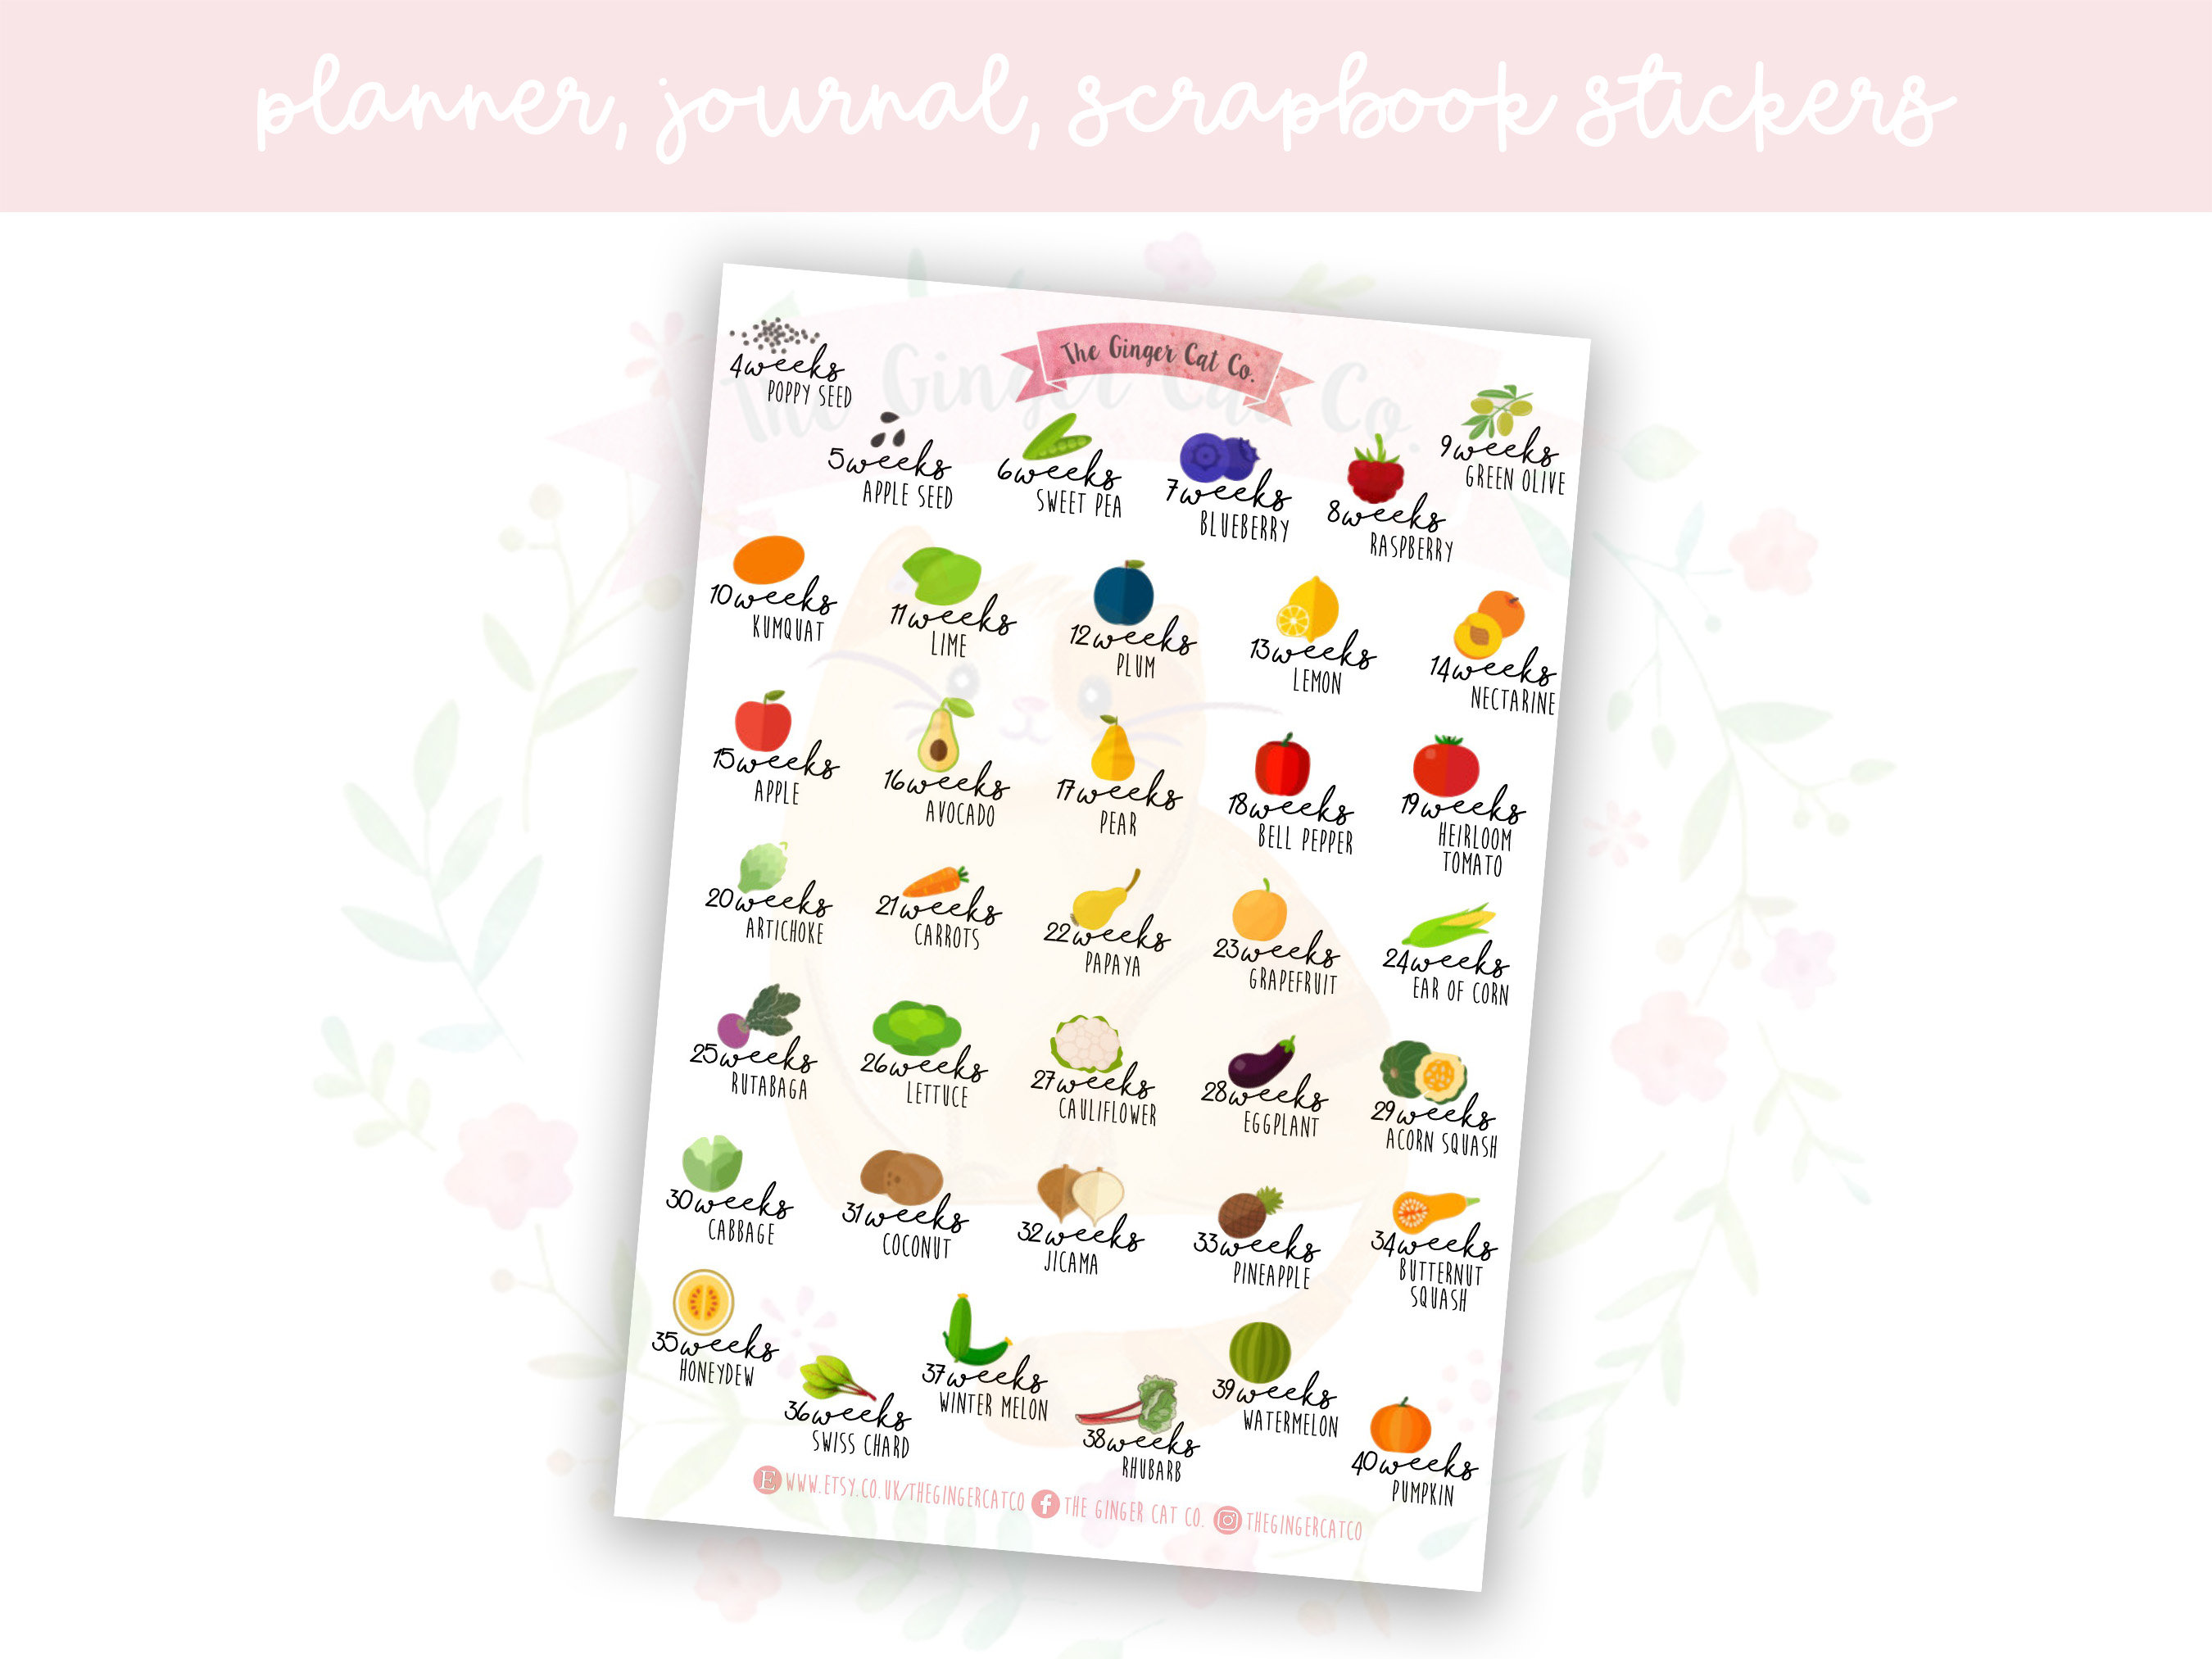 4Sheets/78pcs Baby Scrapbook Stickers for Photo Albums